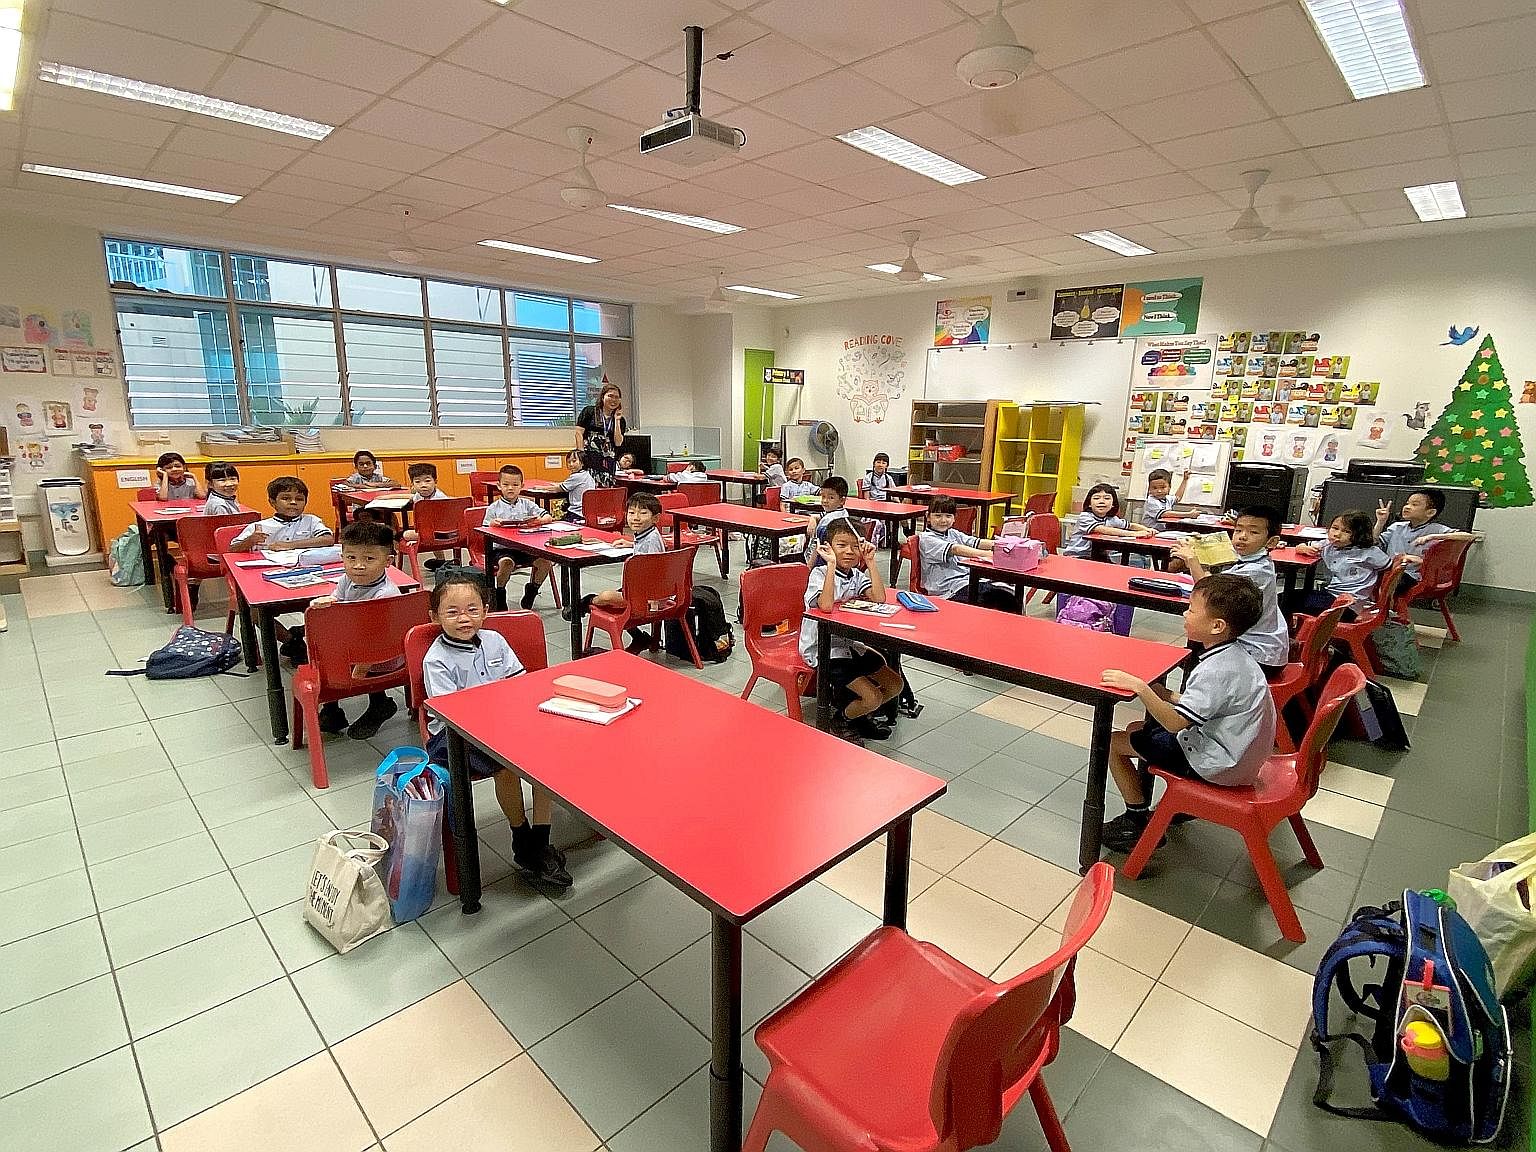 Pupils of Jing Shan Primary returned from the week-long March holidays yesterday to safe distancing measures. In this class, pupils were seated at opposite ends of desks to keep them apart. The Education Ministry has also imposed a leave of absence o